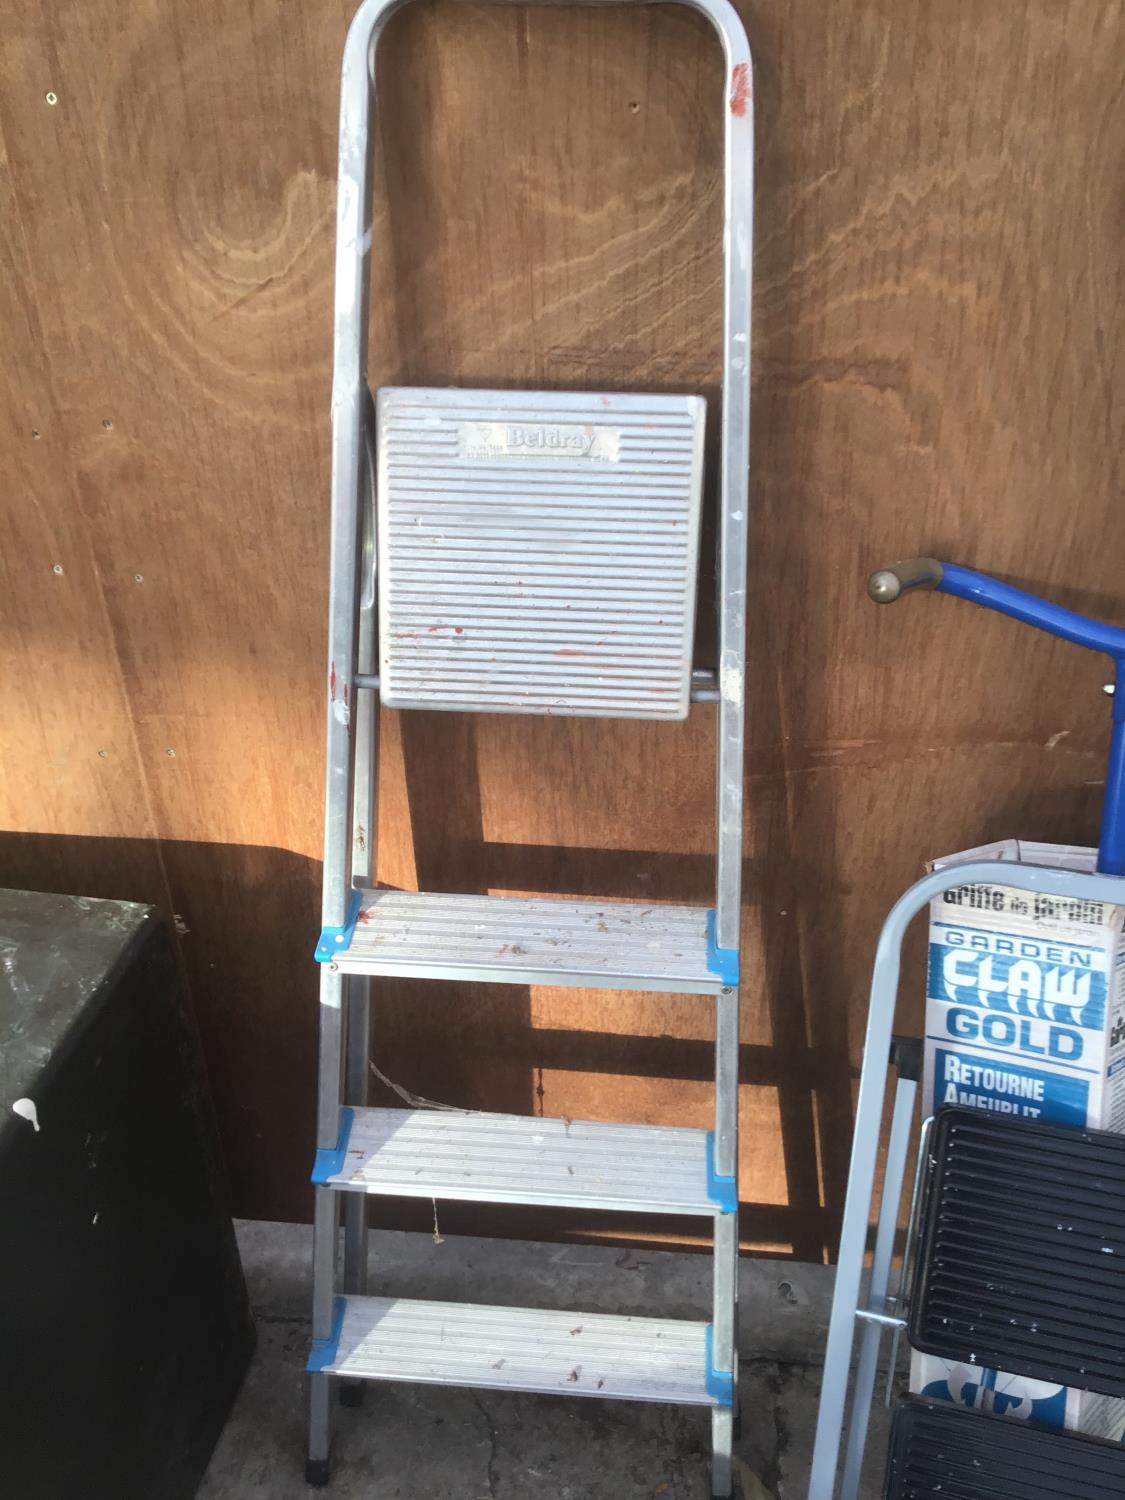 THREE SETS OF METAL STEP LADDERS ONE THREE STEP AND TWO WITH TWO STEPS - Image 2 of 4